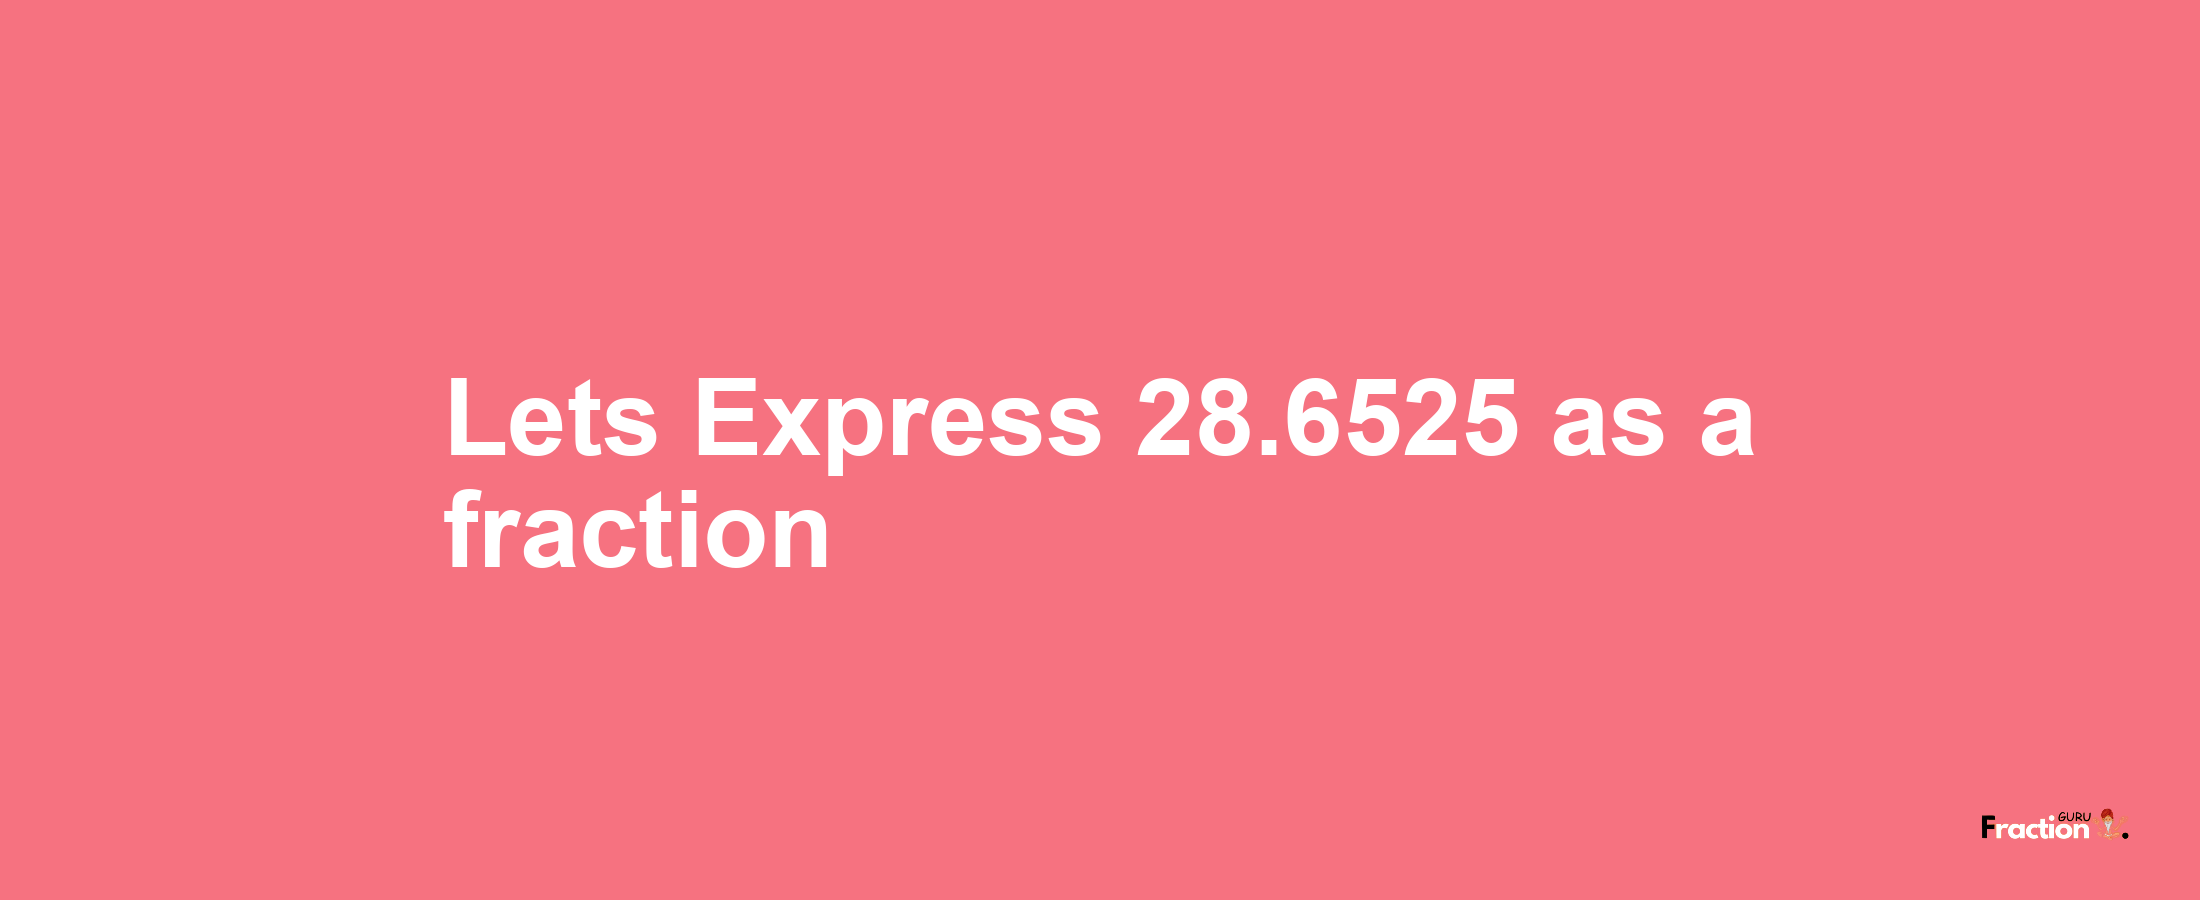 Lets Express 28.6525 as afraction